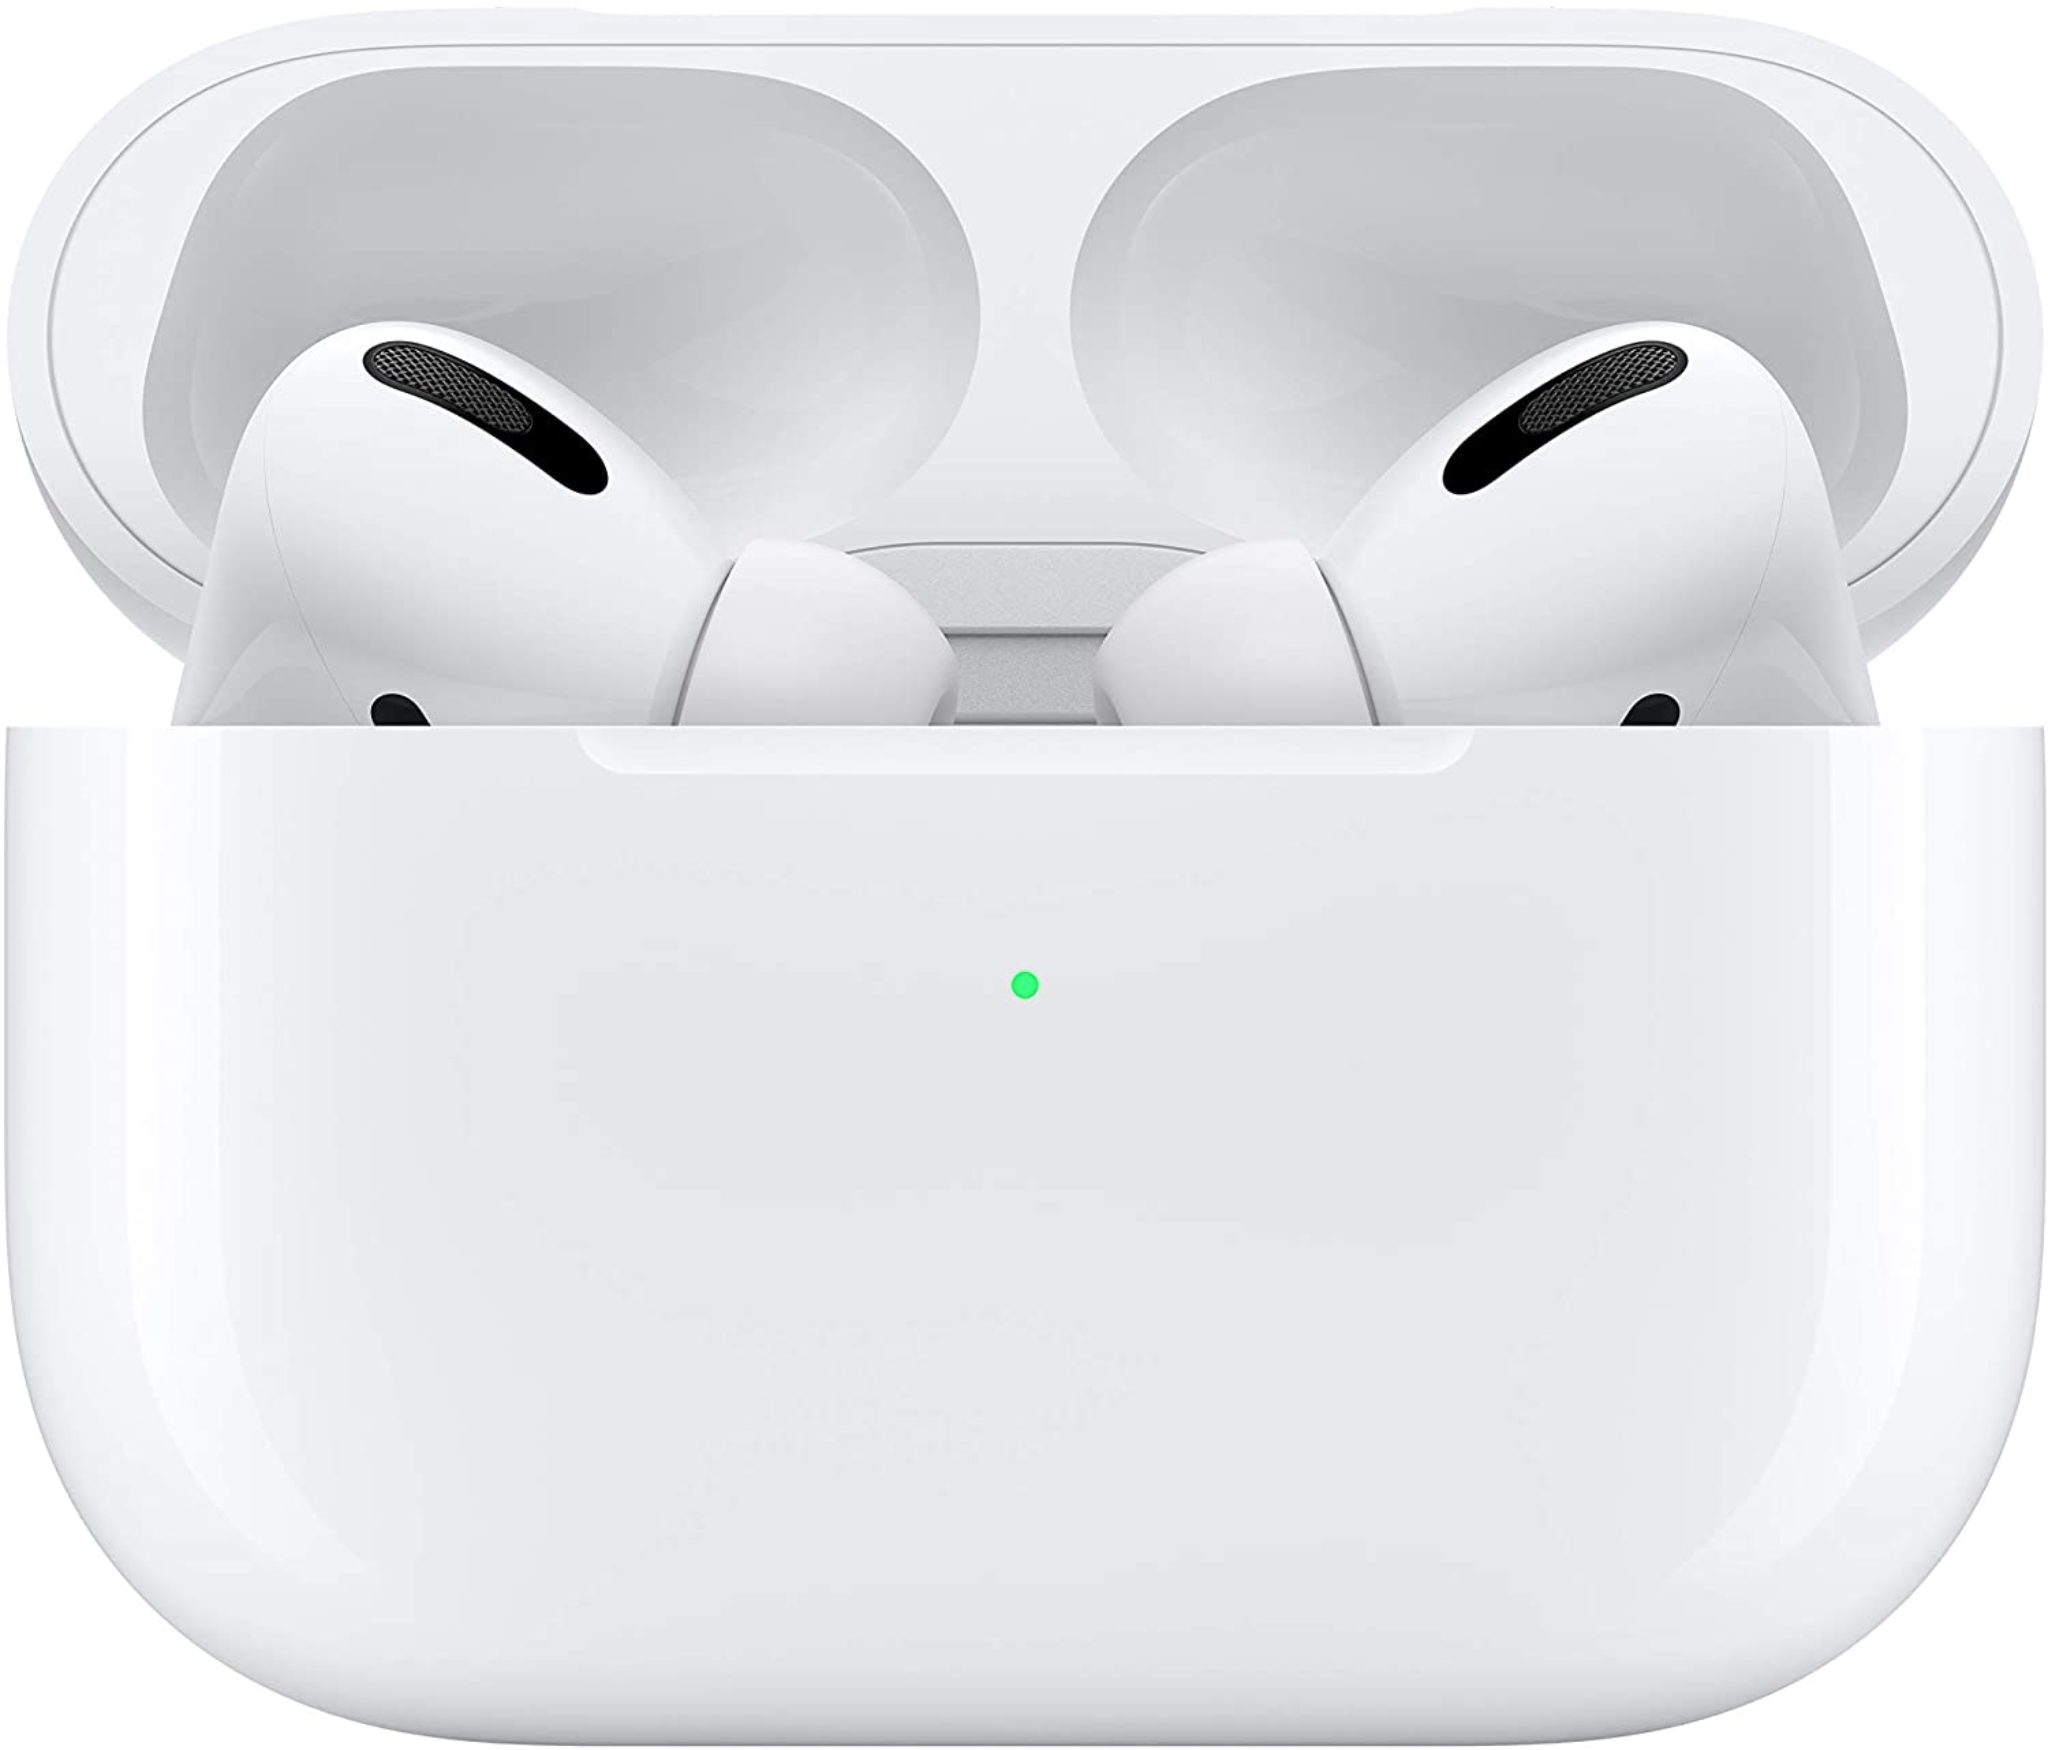 Cyber Monday Sale Apple Airpods Pro Down To 169.99 (Save 80) The